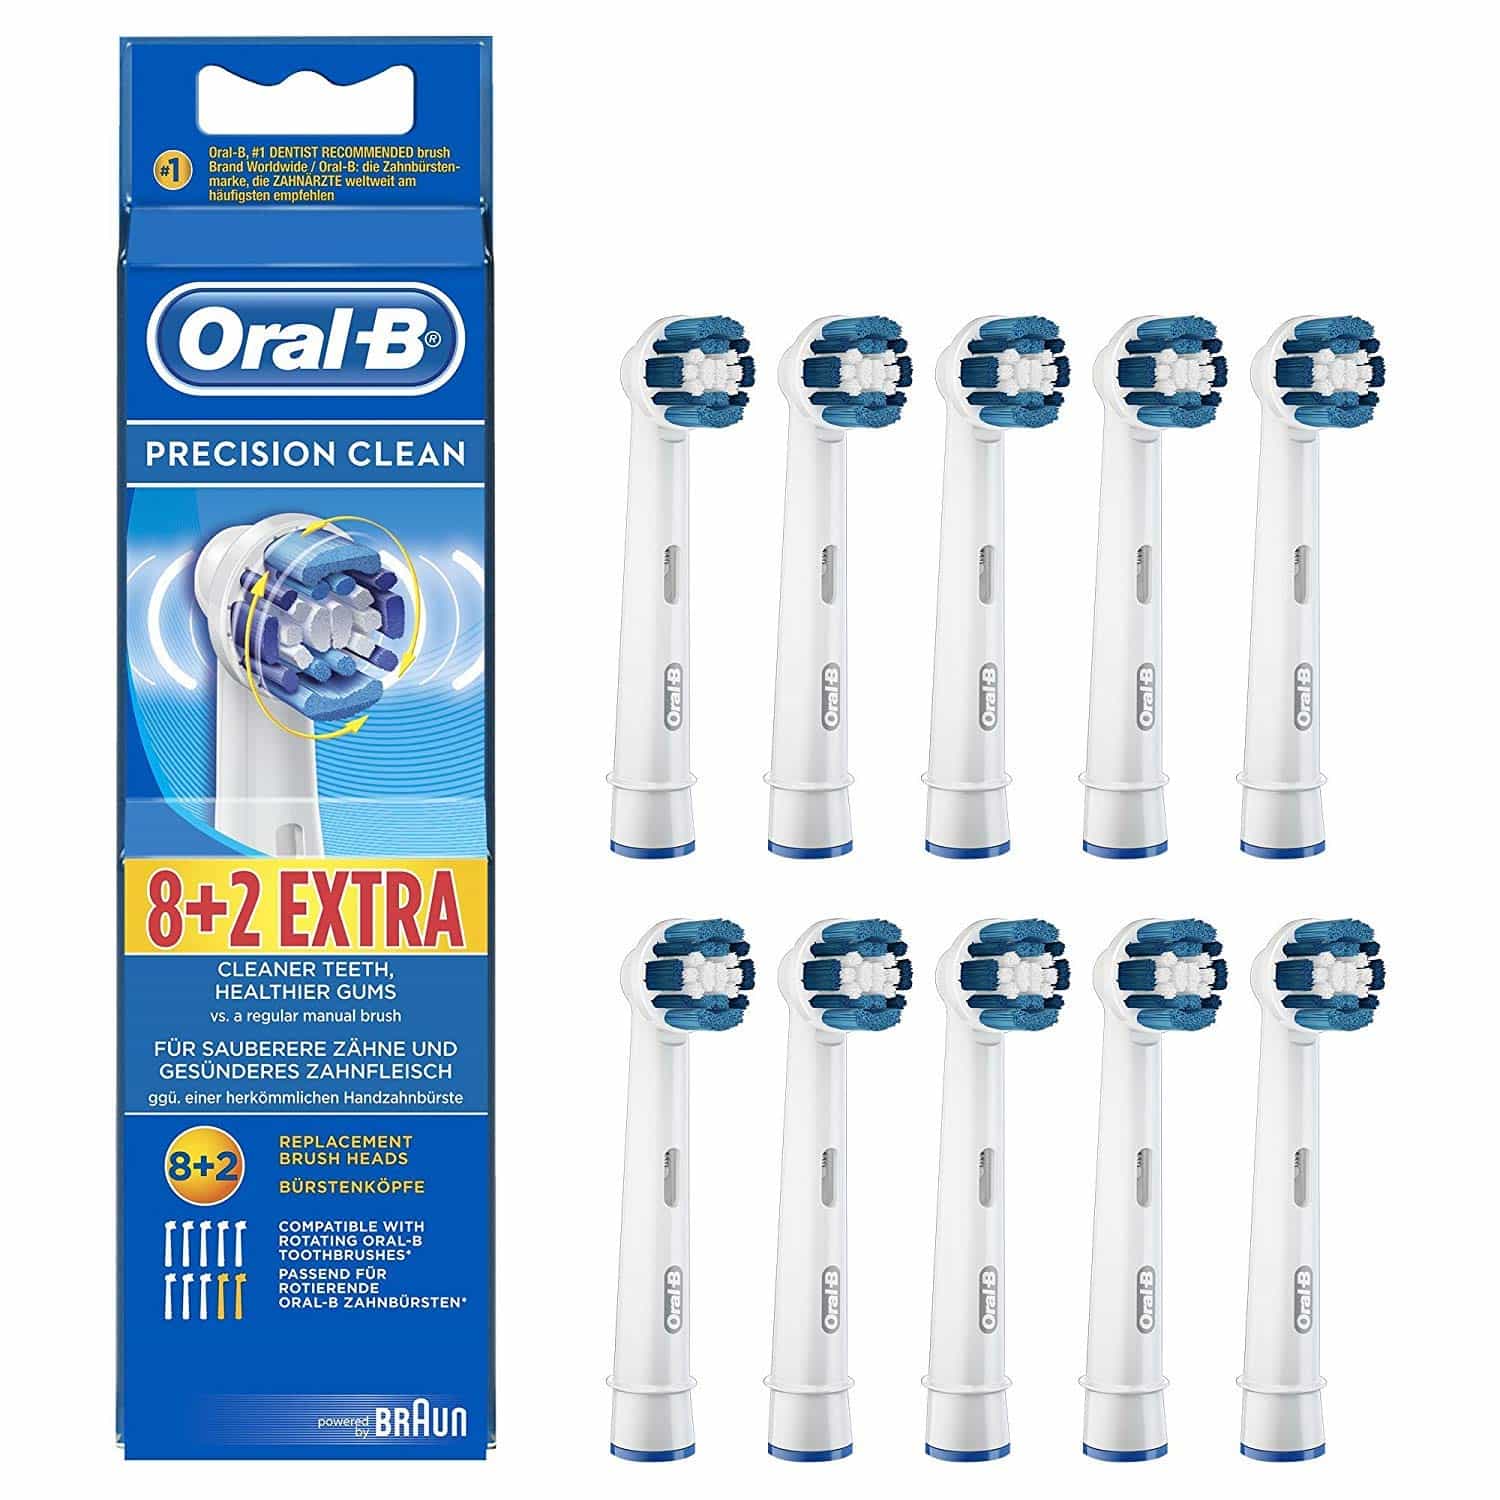 Package of Oral B electric toothbrush replacement heads